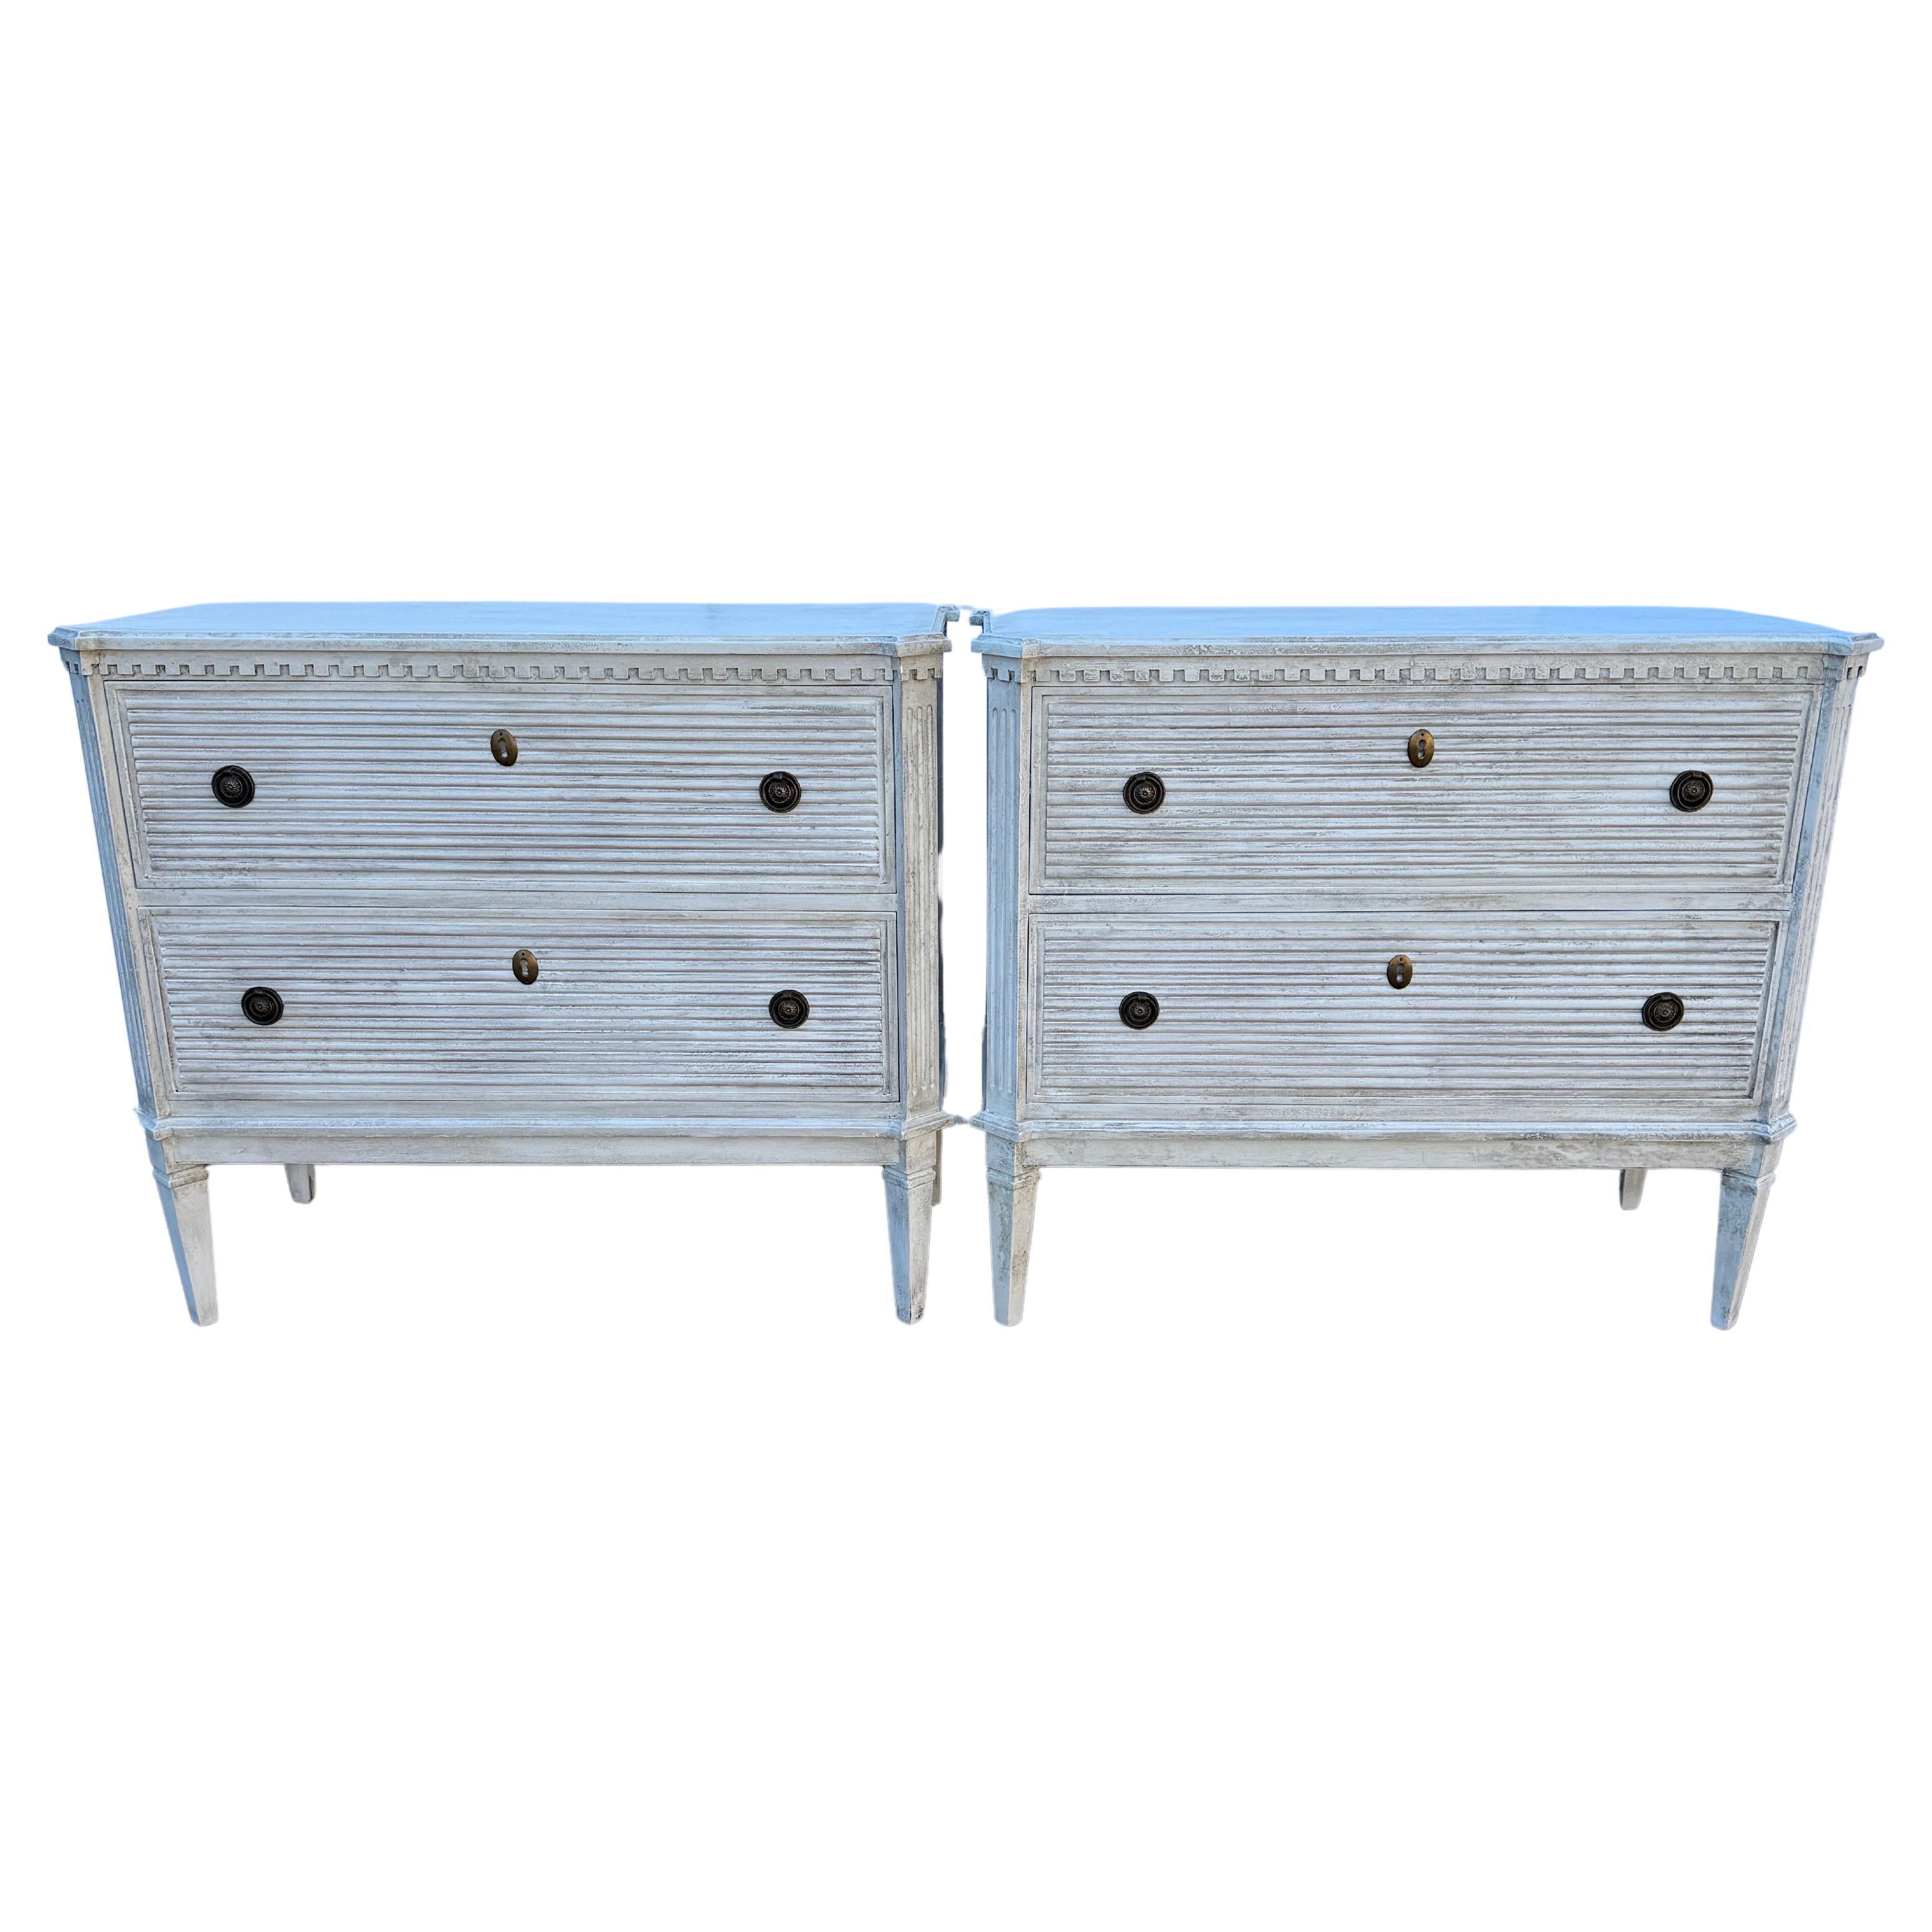 White Painted Gustavian Style Chest of Drawers, A Pair

Pair of white hand painted Gustavian style chest of drawers constructed from solid wood with a hand-applied distressed finish with brass ring hardware.  These classic Swedish style two drawer